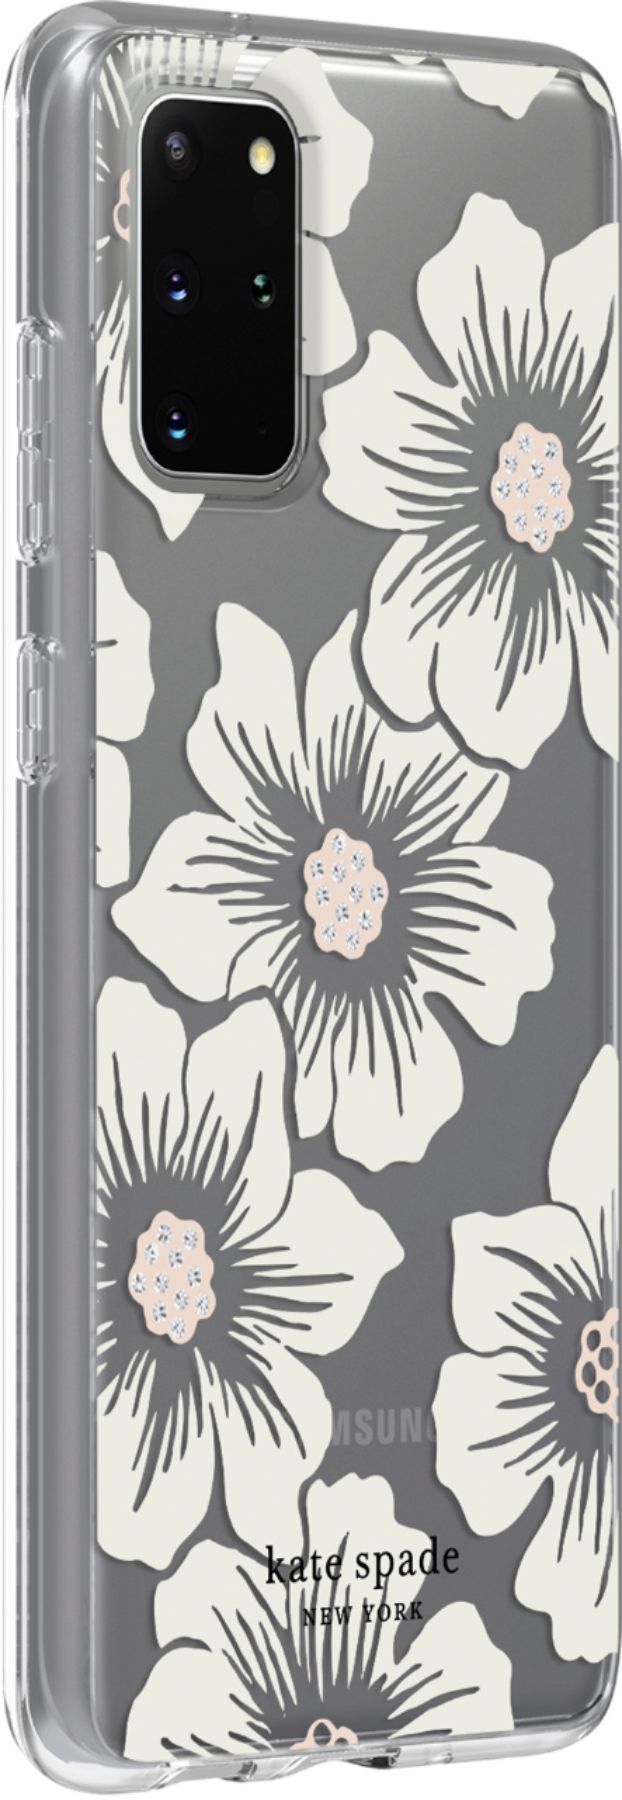 Angle View: kate spade new york - Protective Hard-Shell Case for Samsung Galaxy S20+ 5G - Hollyhock Floral Clear/Cream With Stones